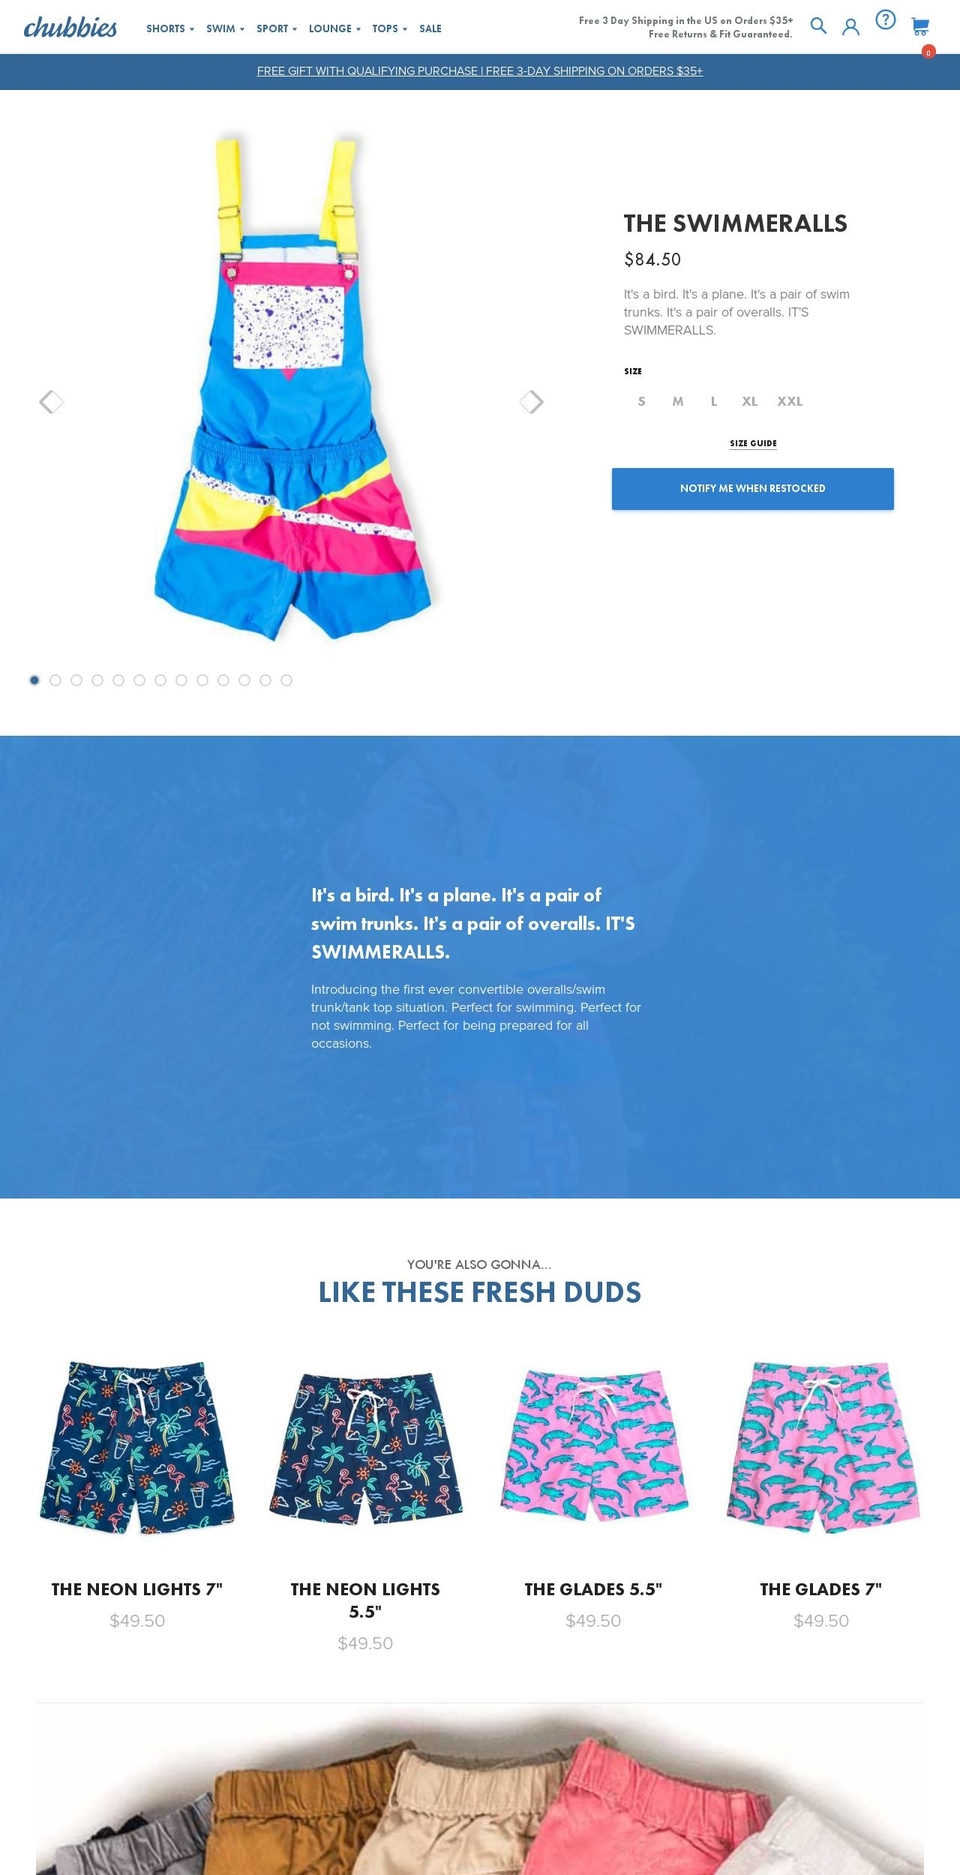 [Sunday messaging] DESKTOP | gift engine | 8.12.18 Shopify theme site example theswimmeralls.com